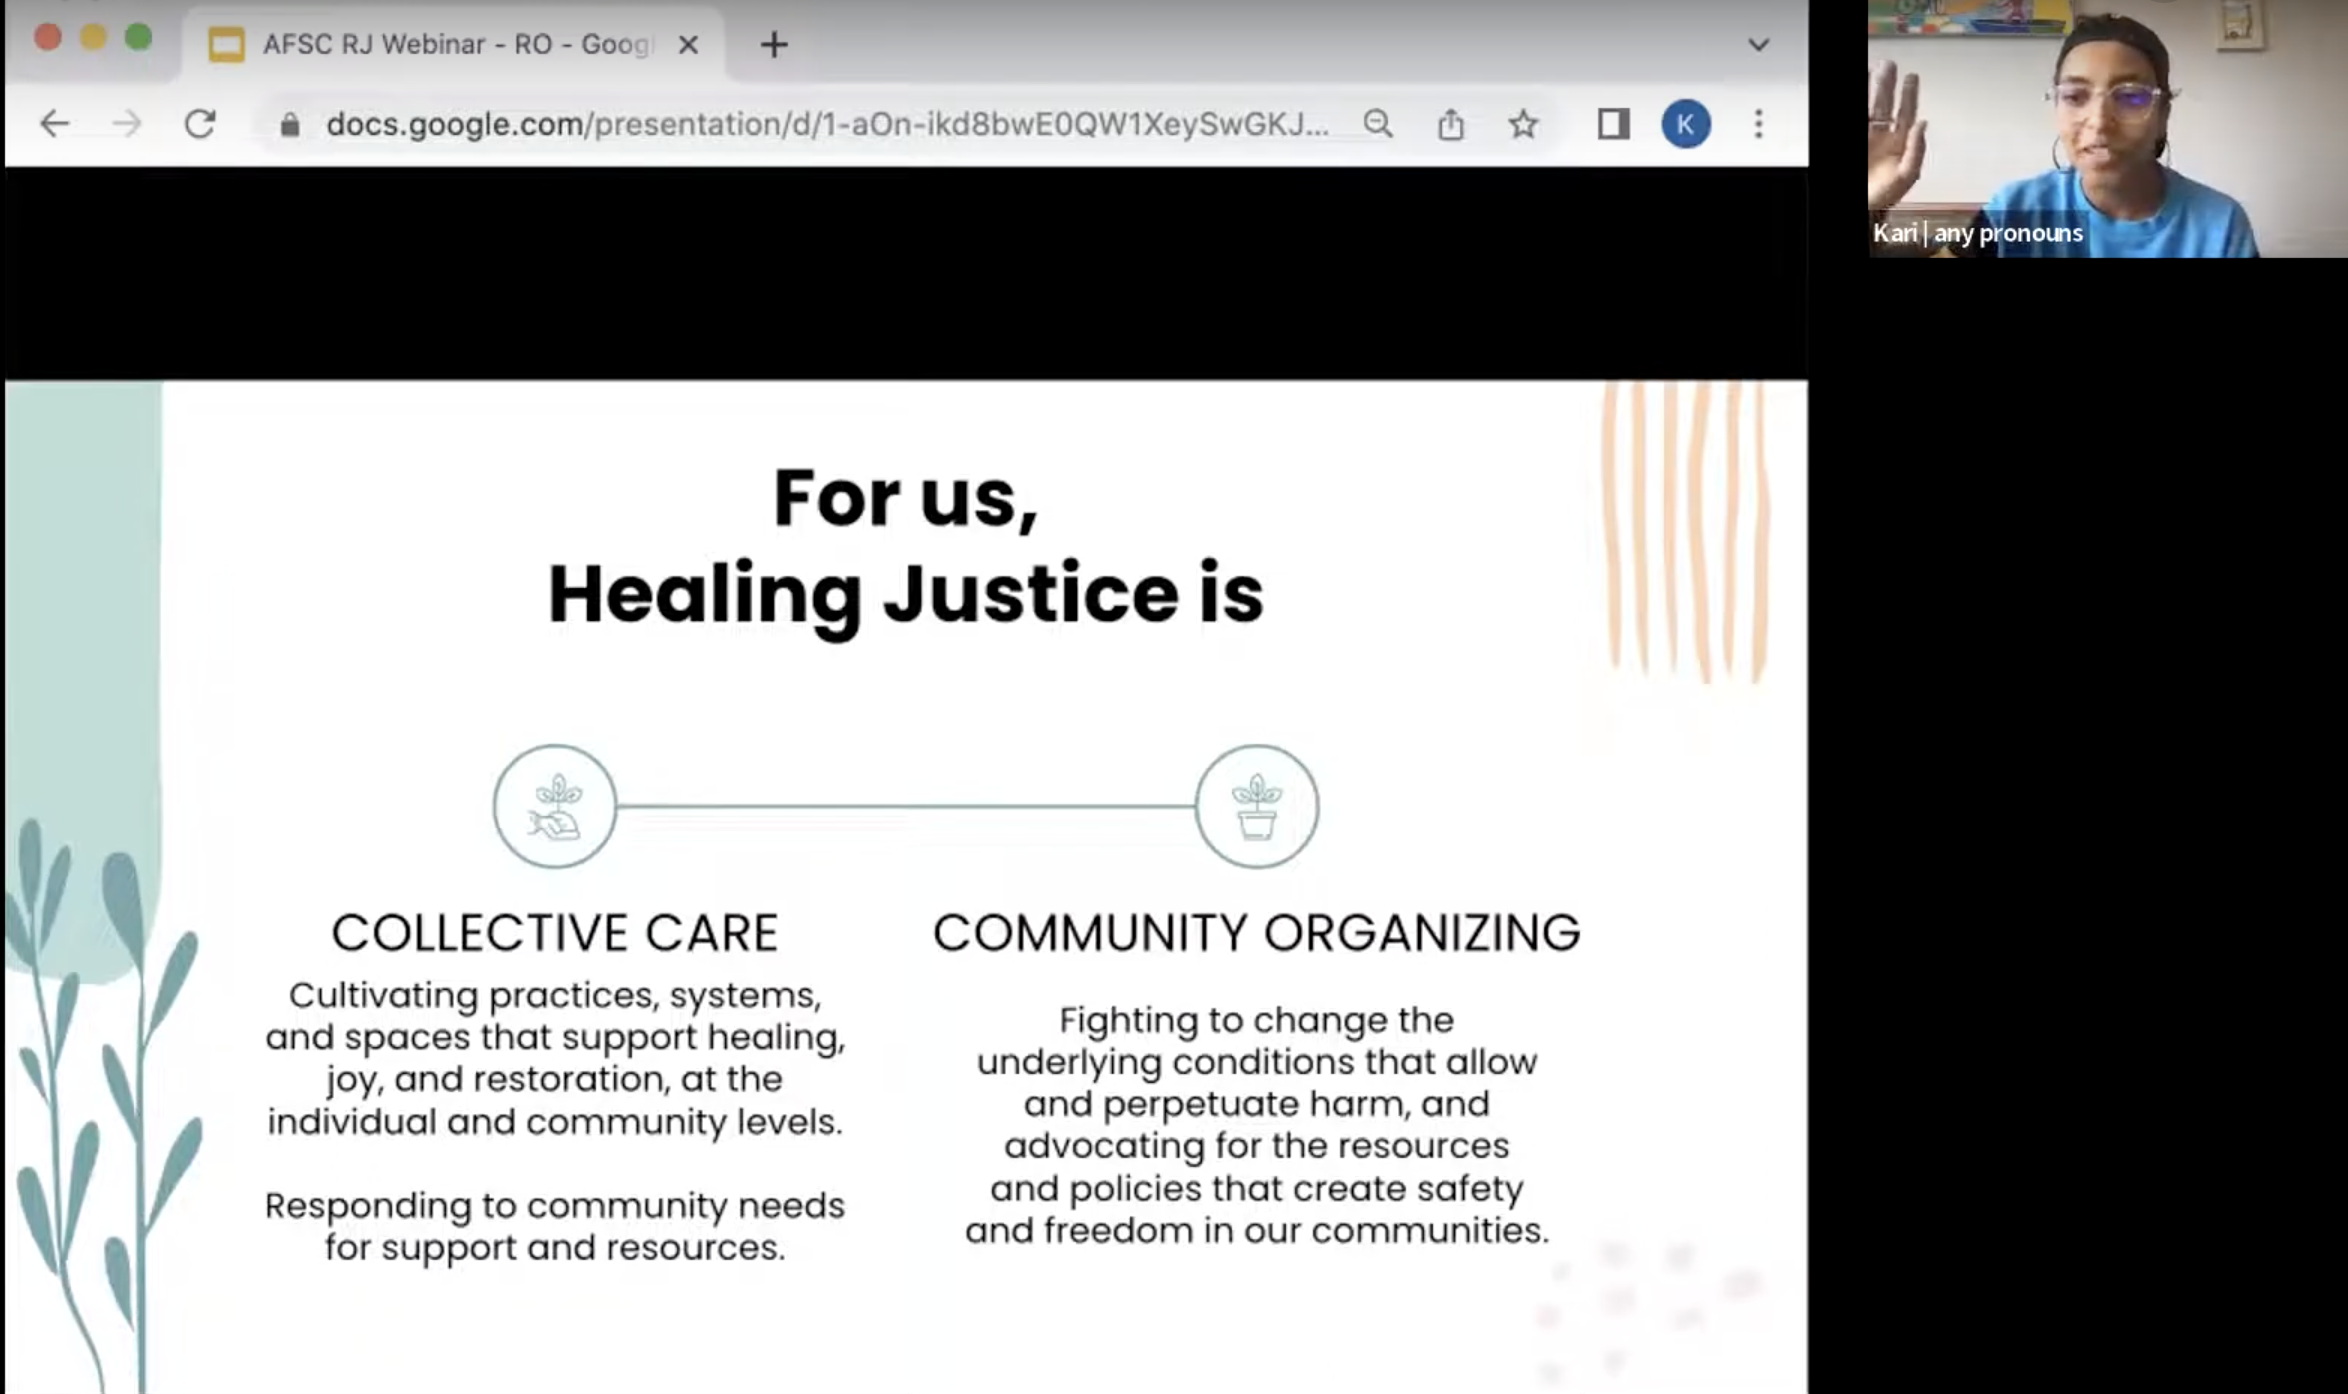 Watch our webinar recordings to learn more about Restorative Justice